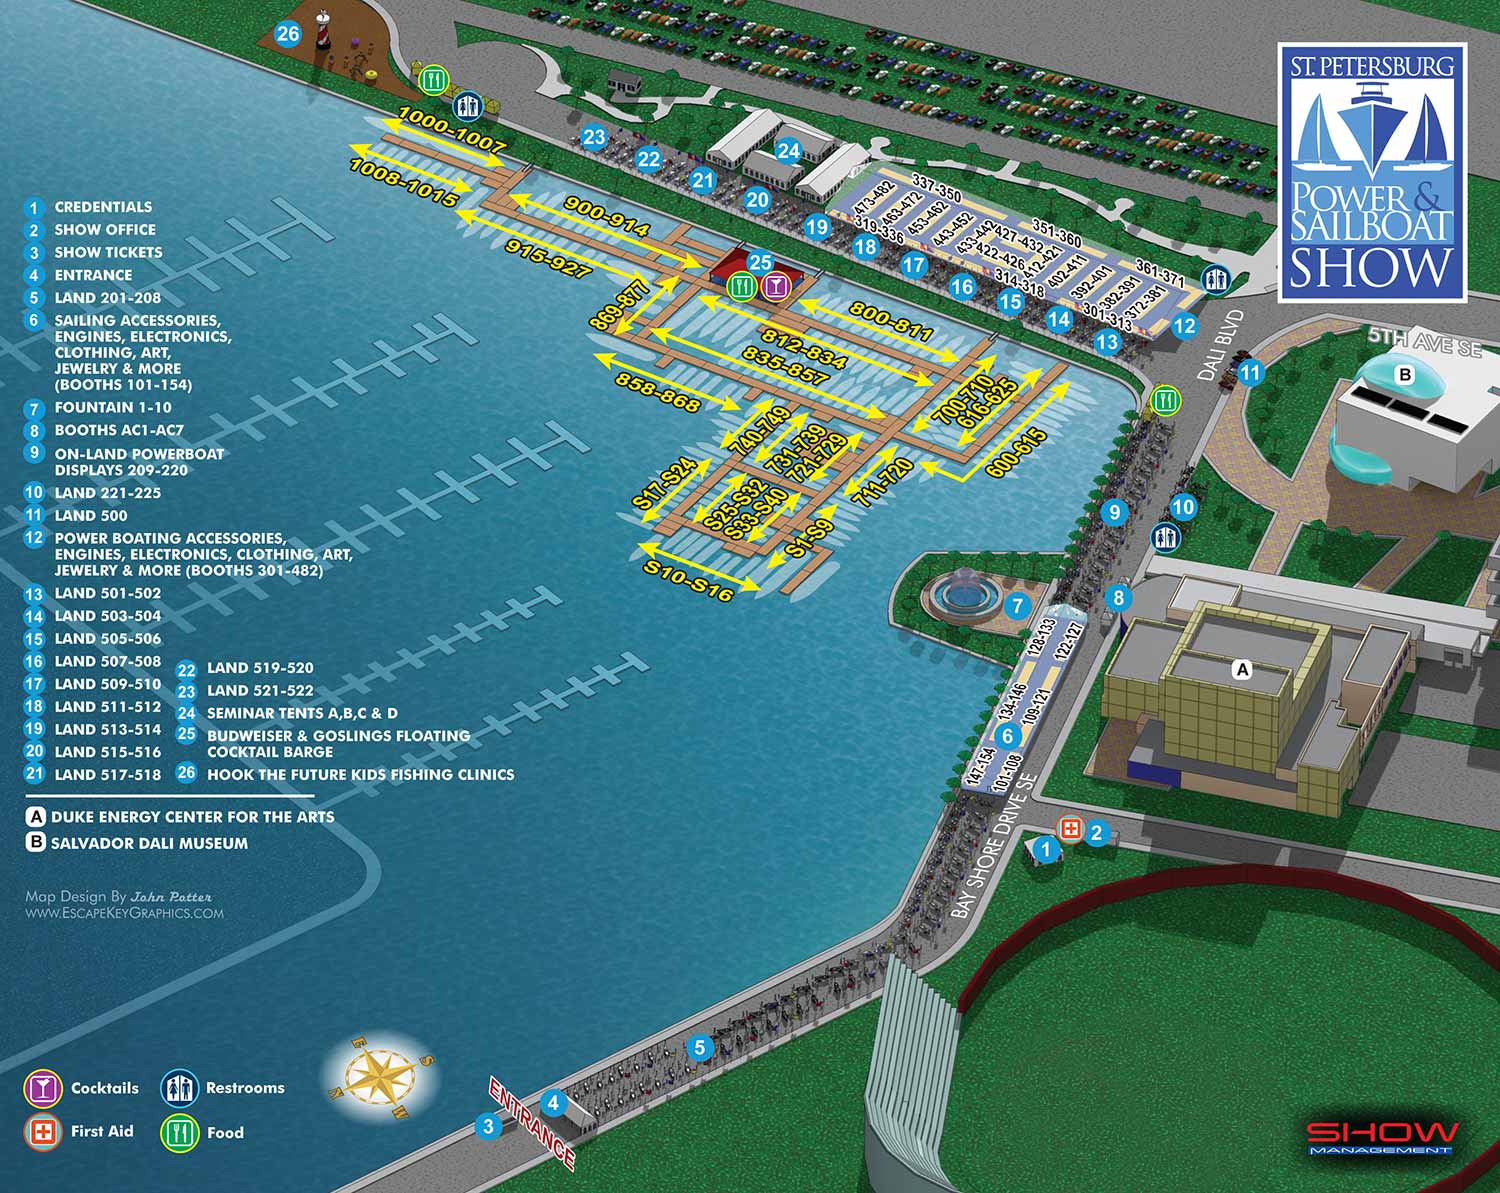 Illustrated Saint Petersburg Power and Sailboat Show Map 2015